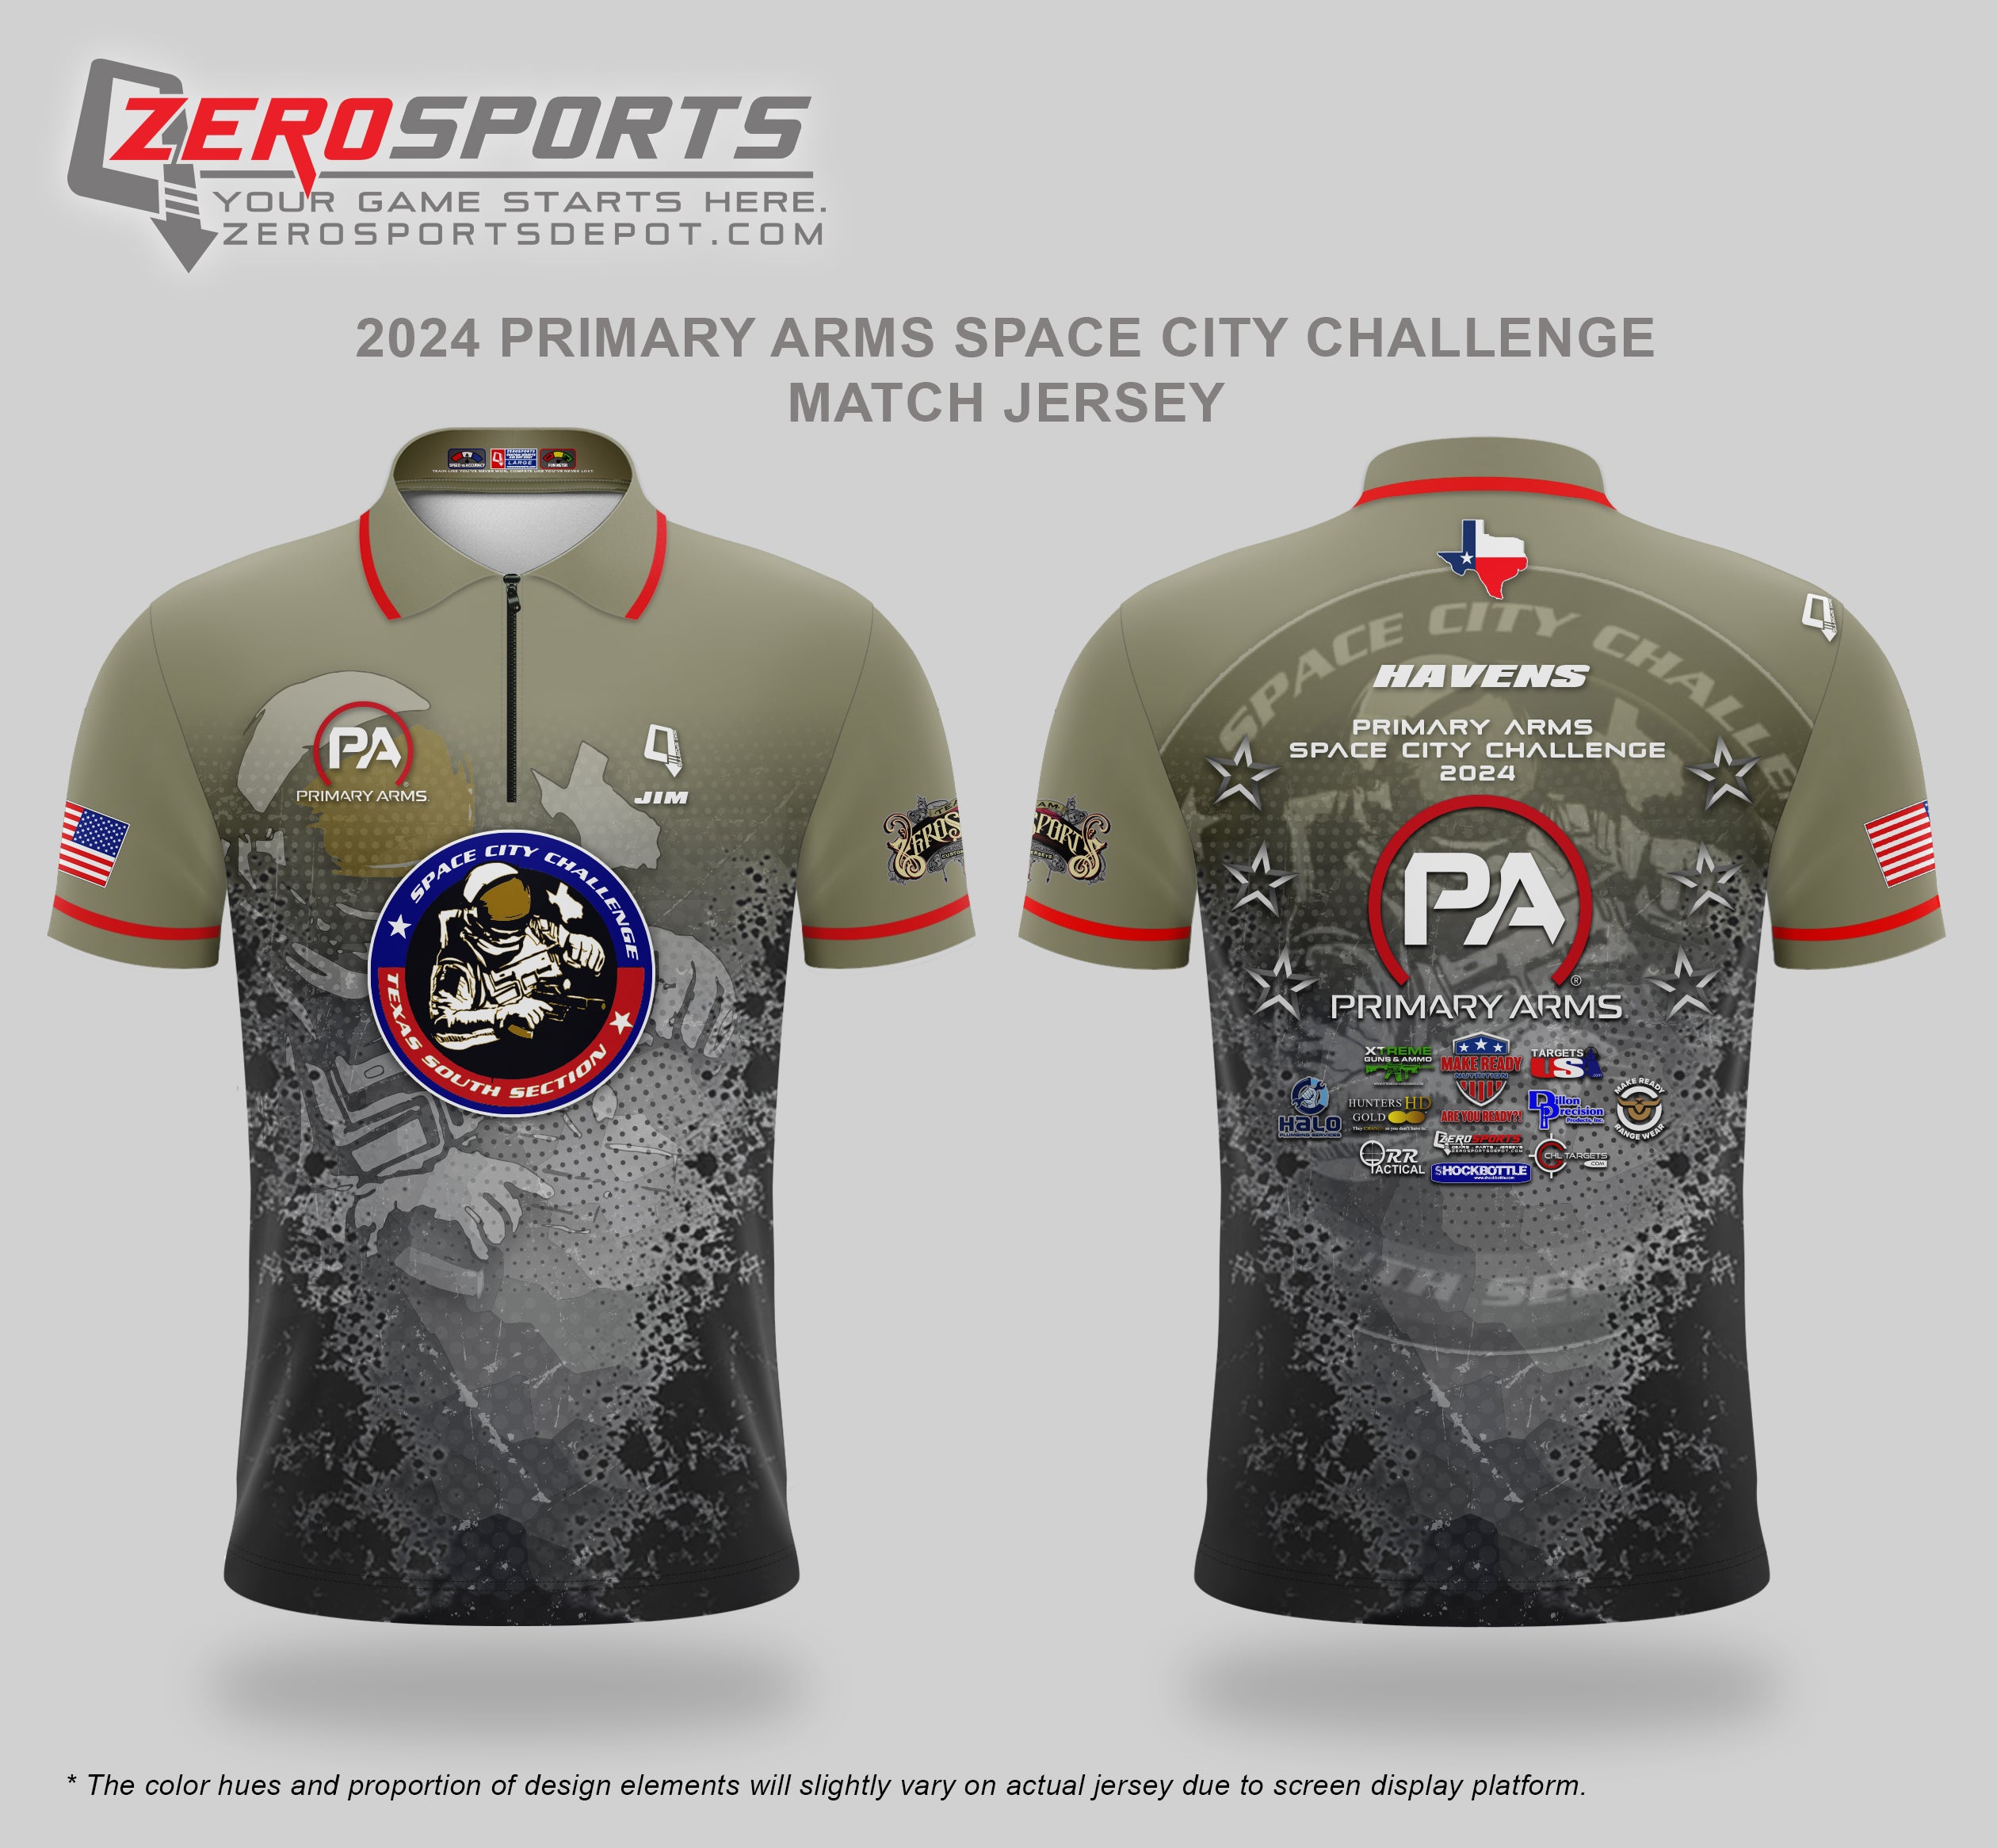 Space City Challenge 2024 Match Jersey